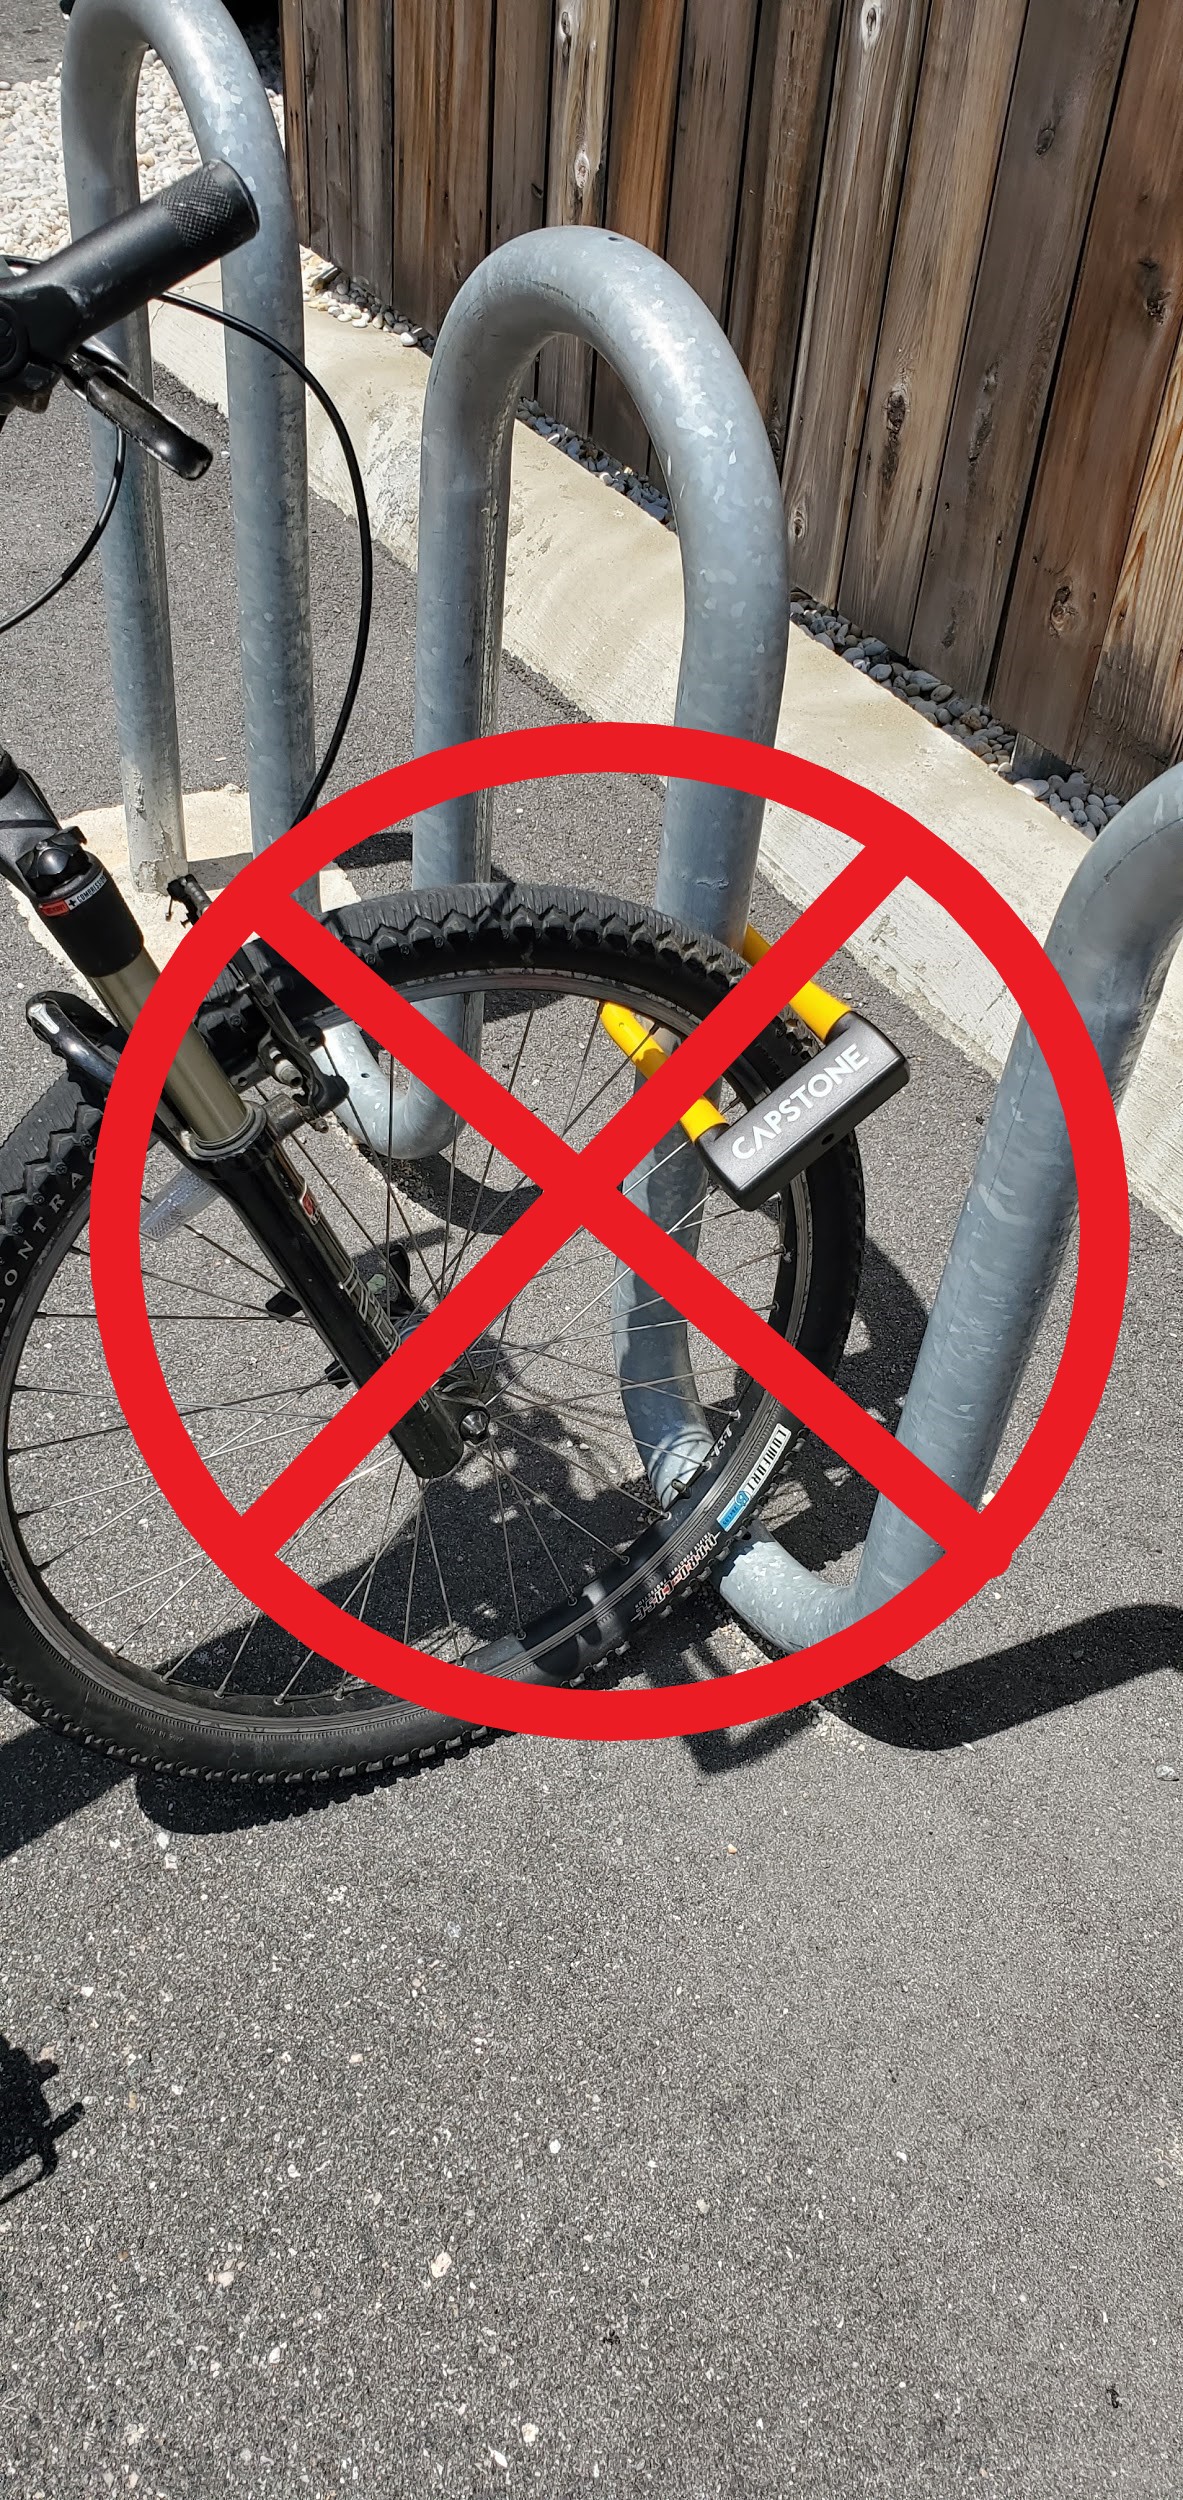 A bike lock that is only securing the front tire of the bike and not the bike frame.